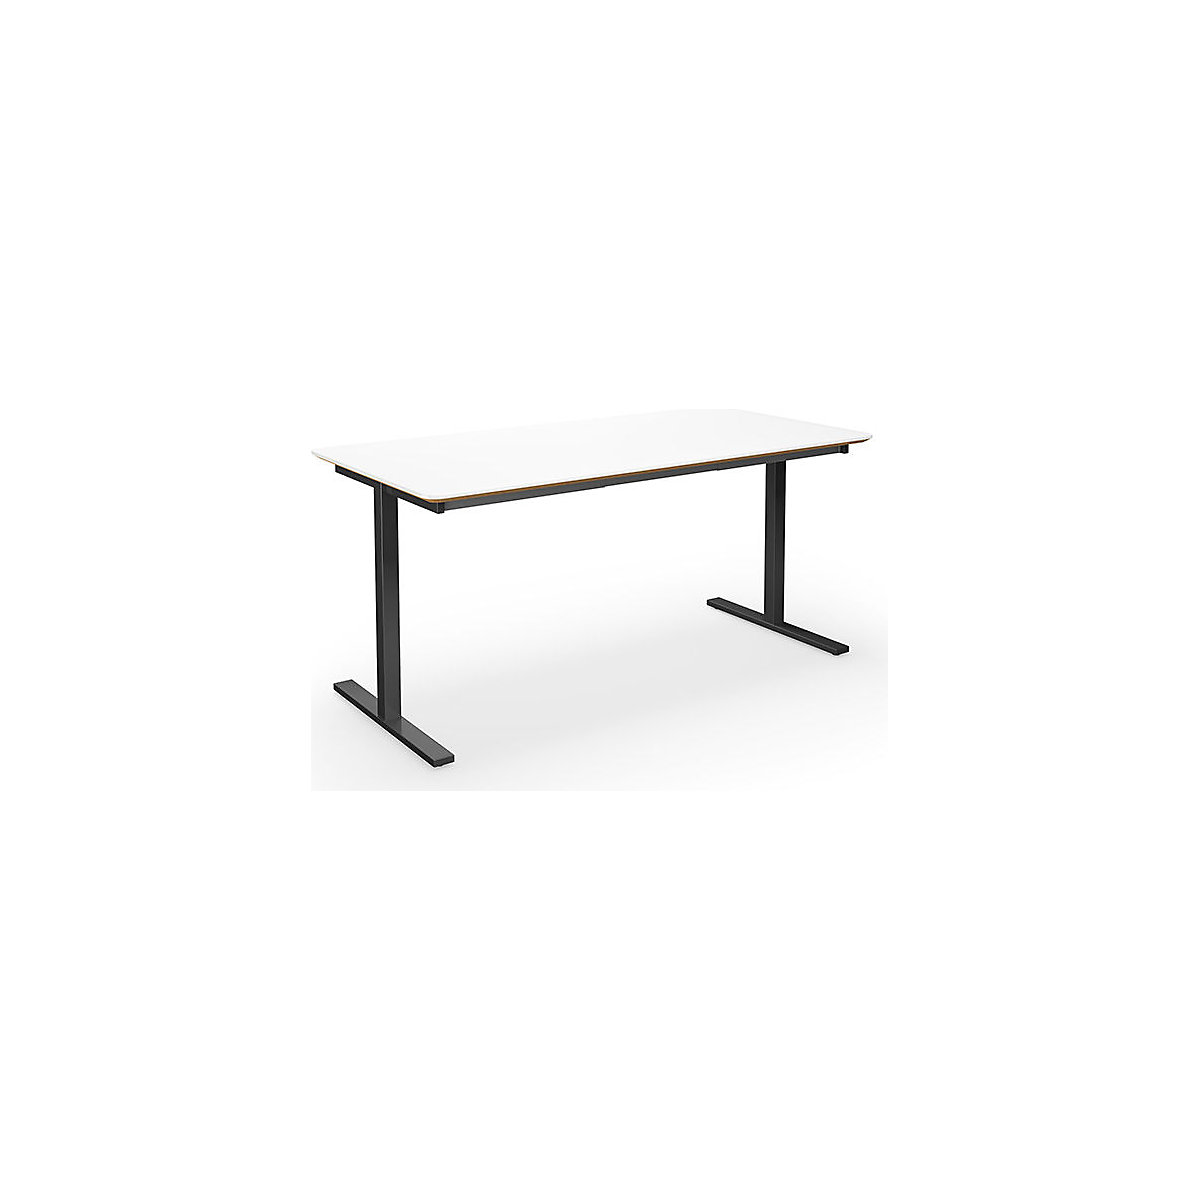 DUO-T Trend multi-purpose desk, straight tabletop, rounded corners, WxD 1400 x 800 mm, white, black-2